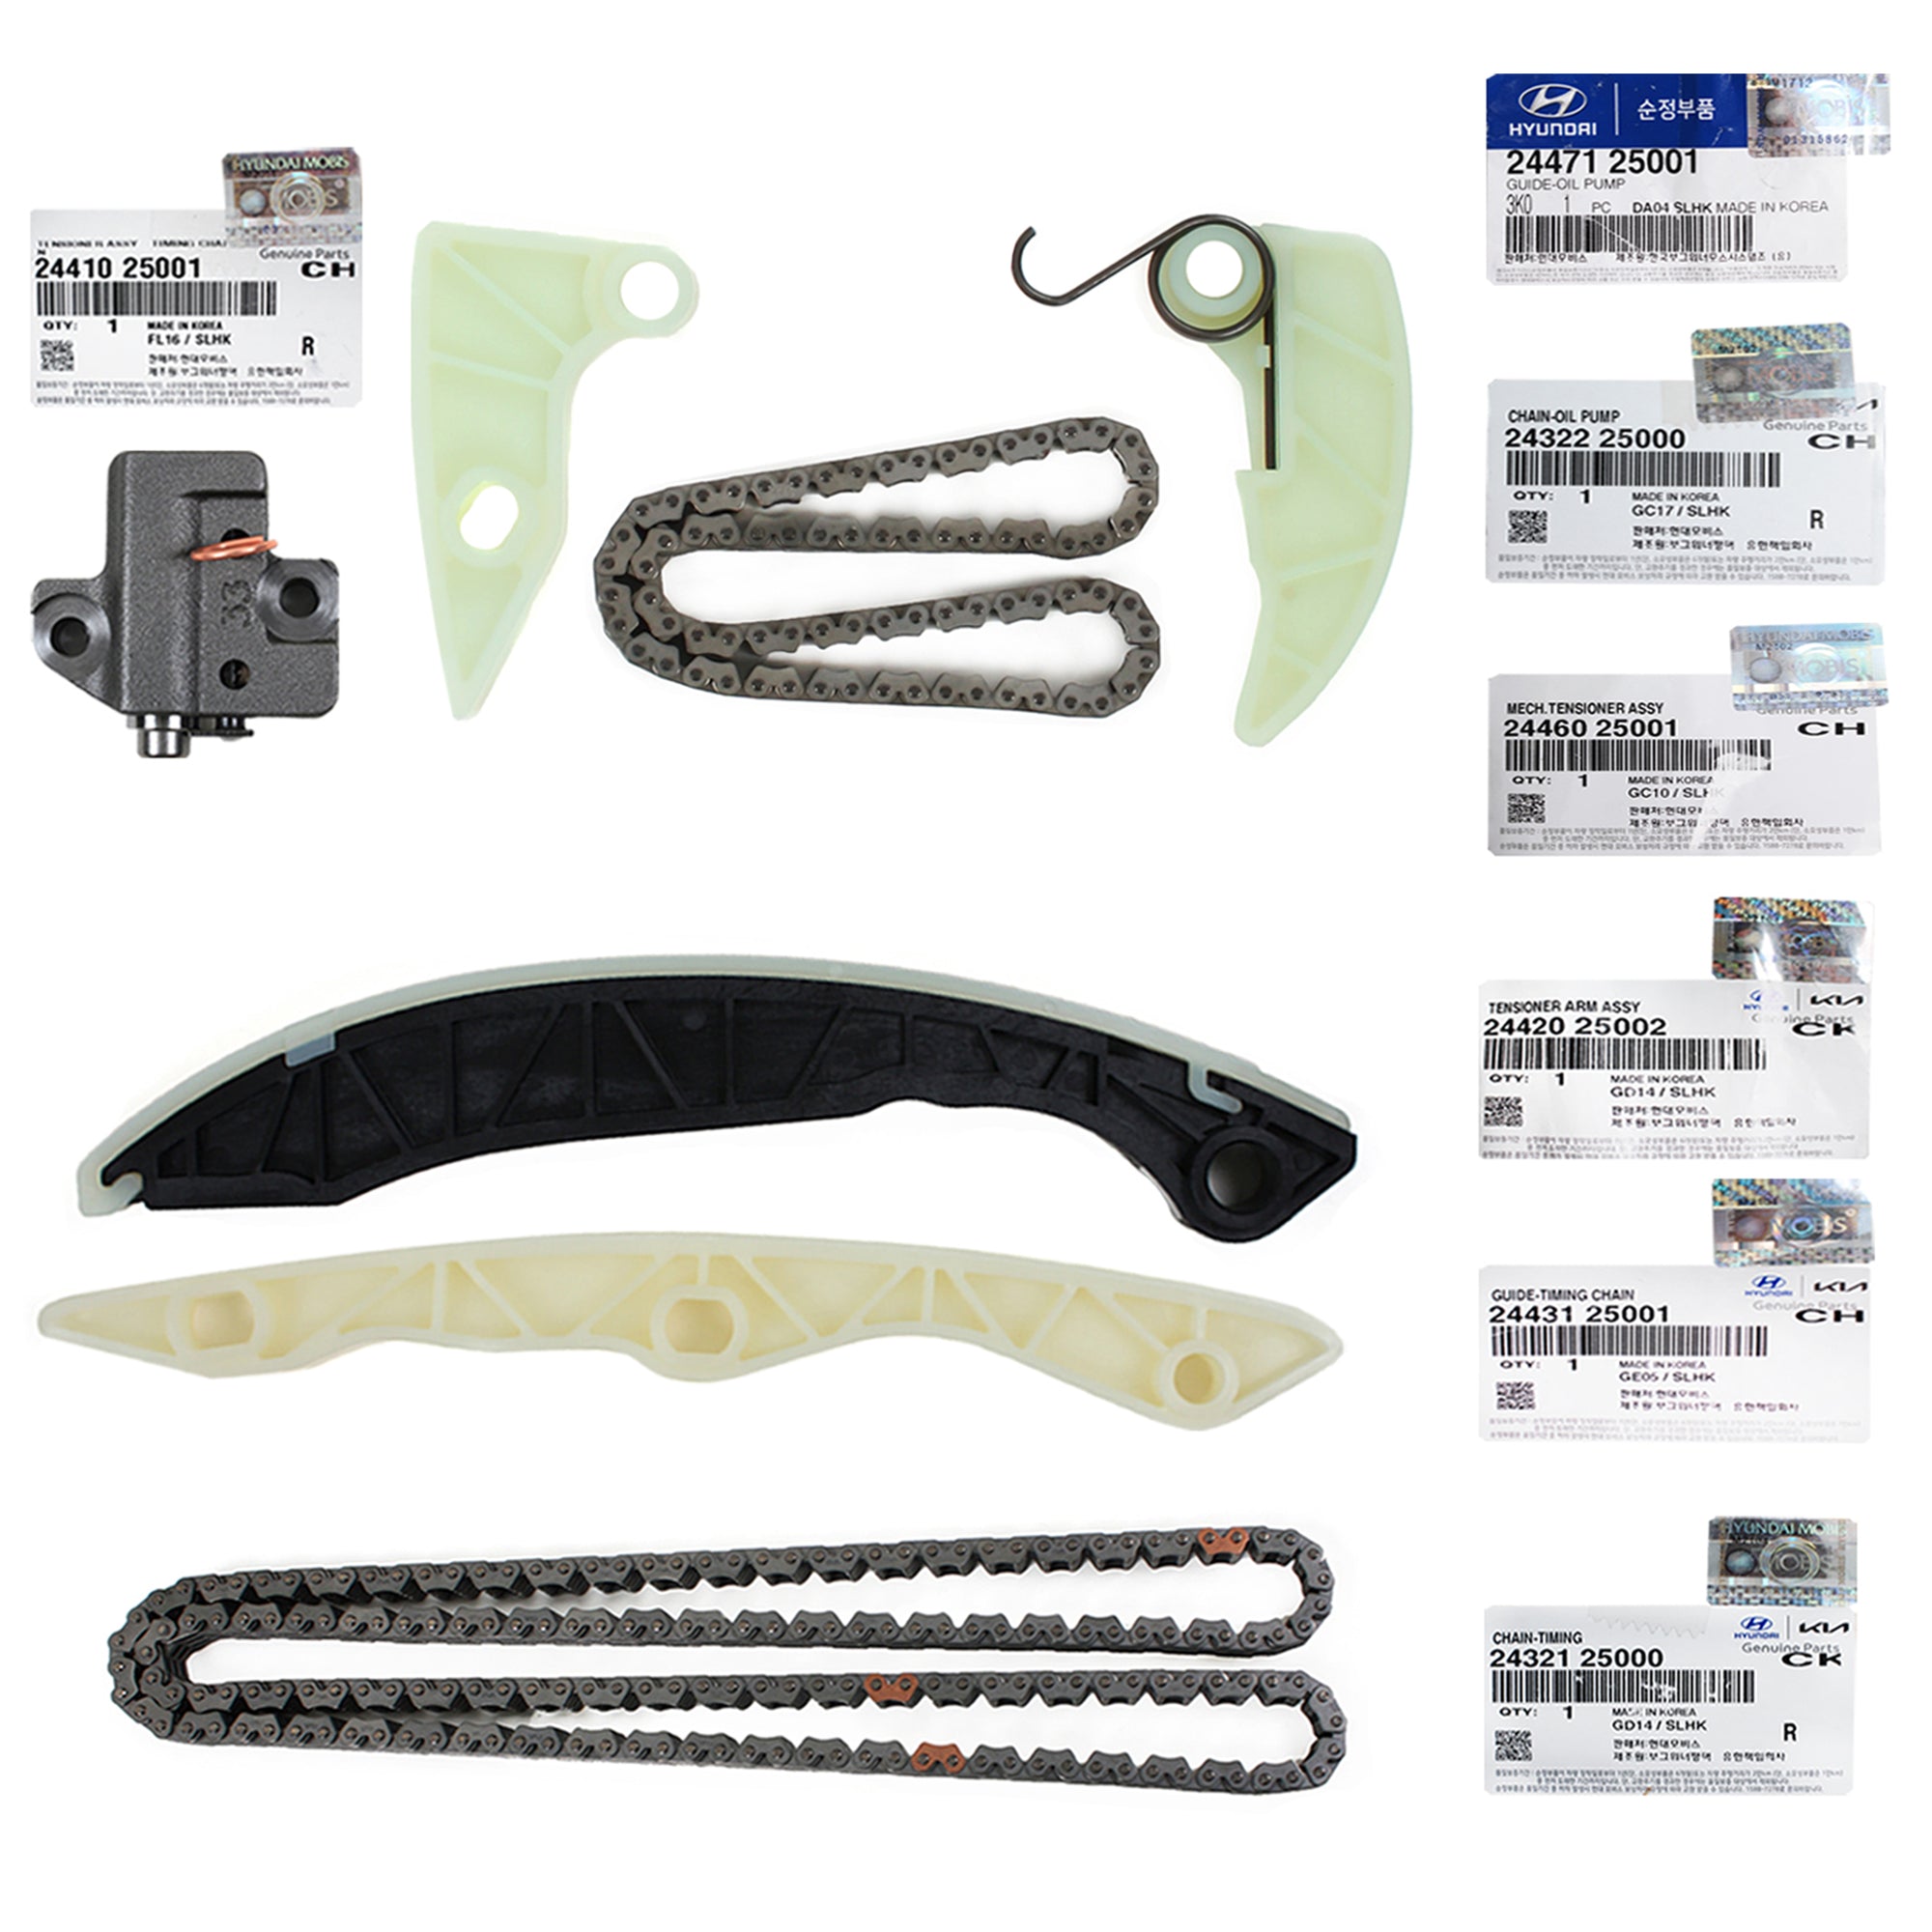 GENUINE Full Timing Chain Kit for 2010-2013 Genesis Coupe Forte 2.0L OEM